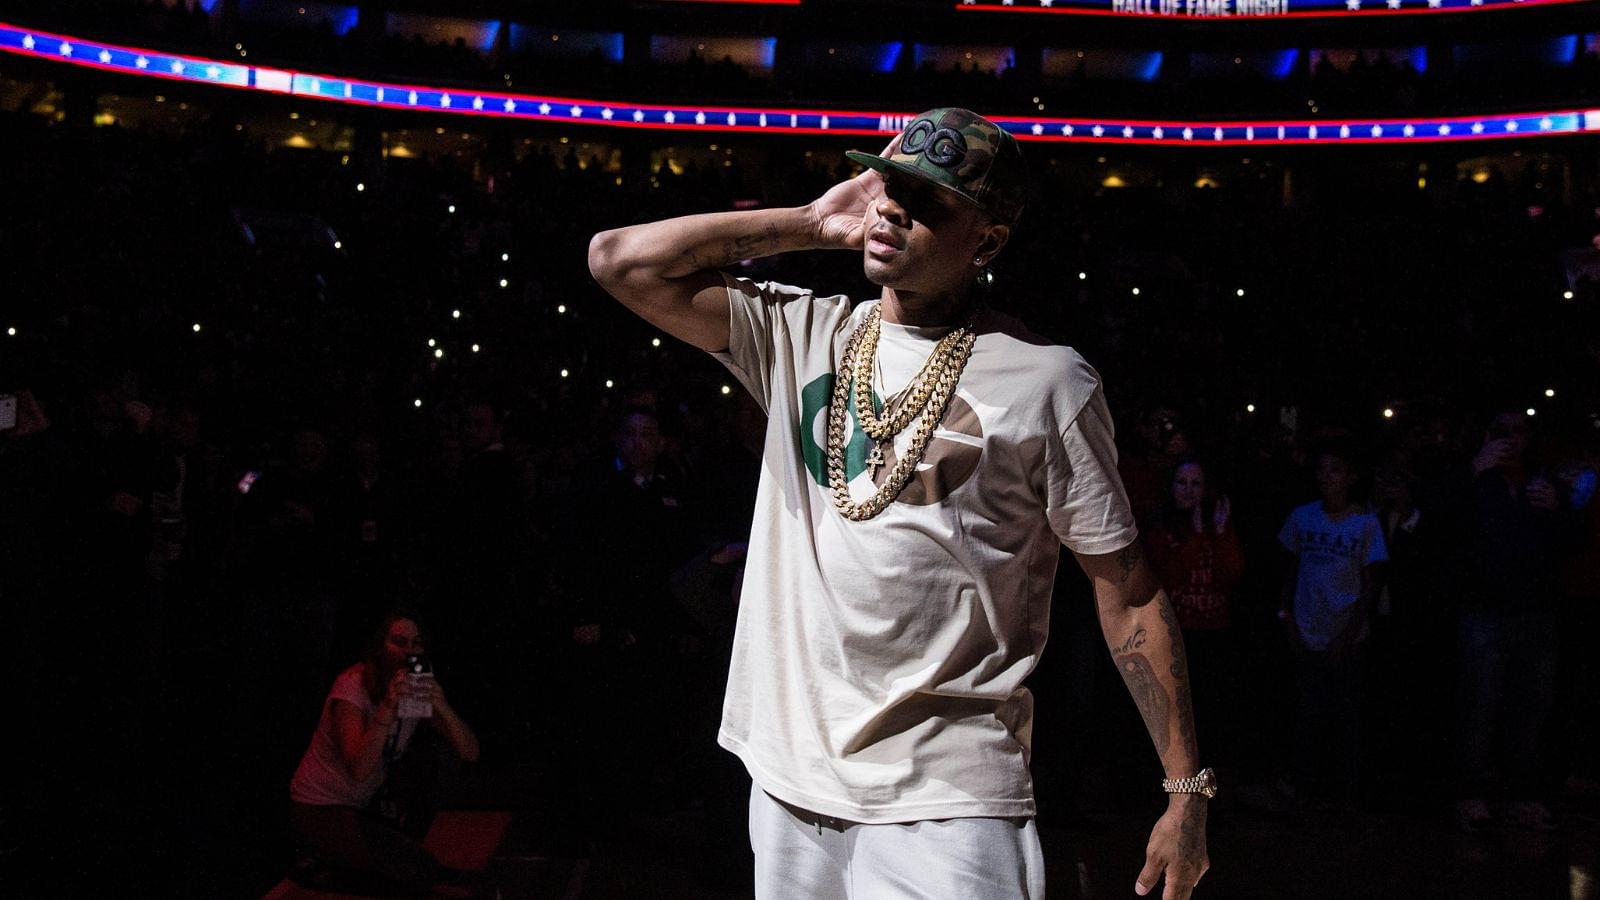 Allen Iverson threw $40,000/night in strip clubs and an NBA champ scooped some of those bills up